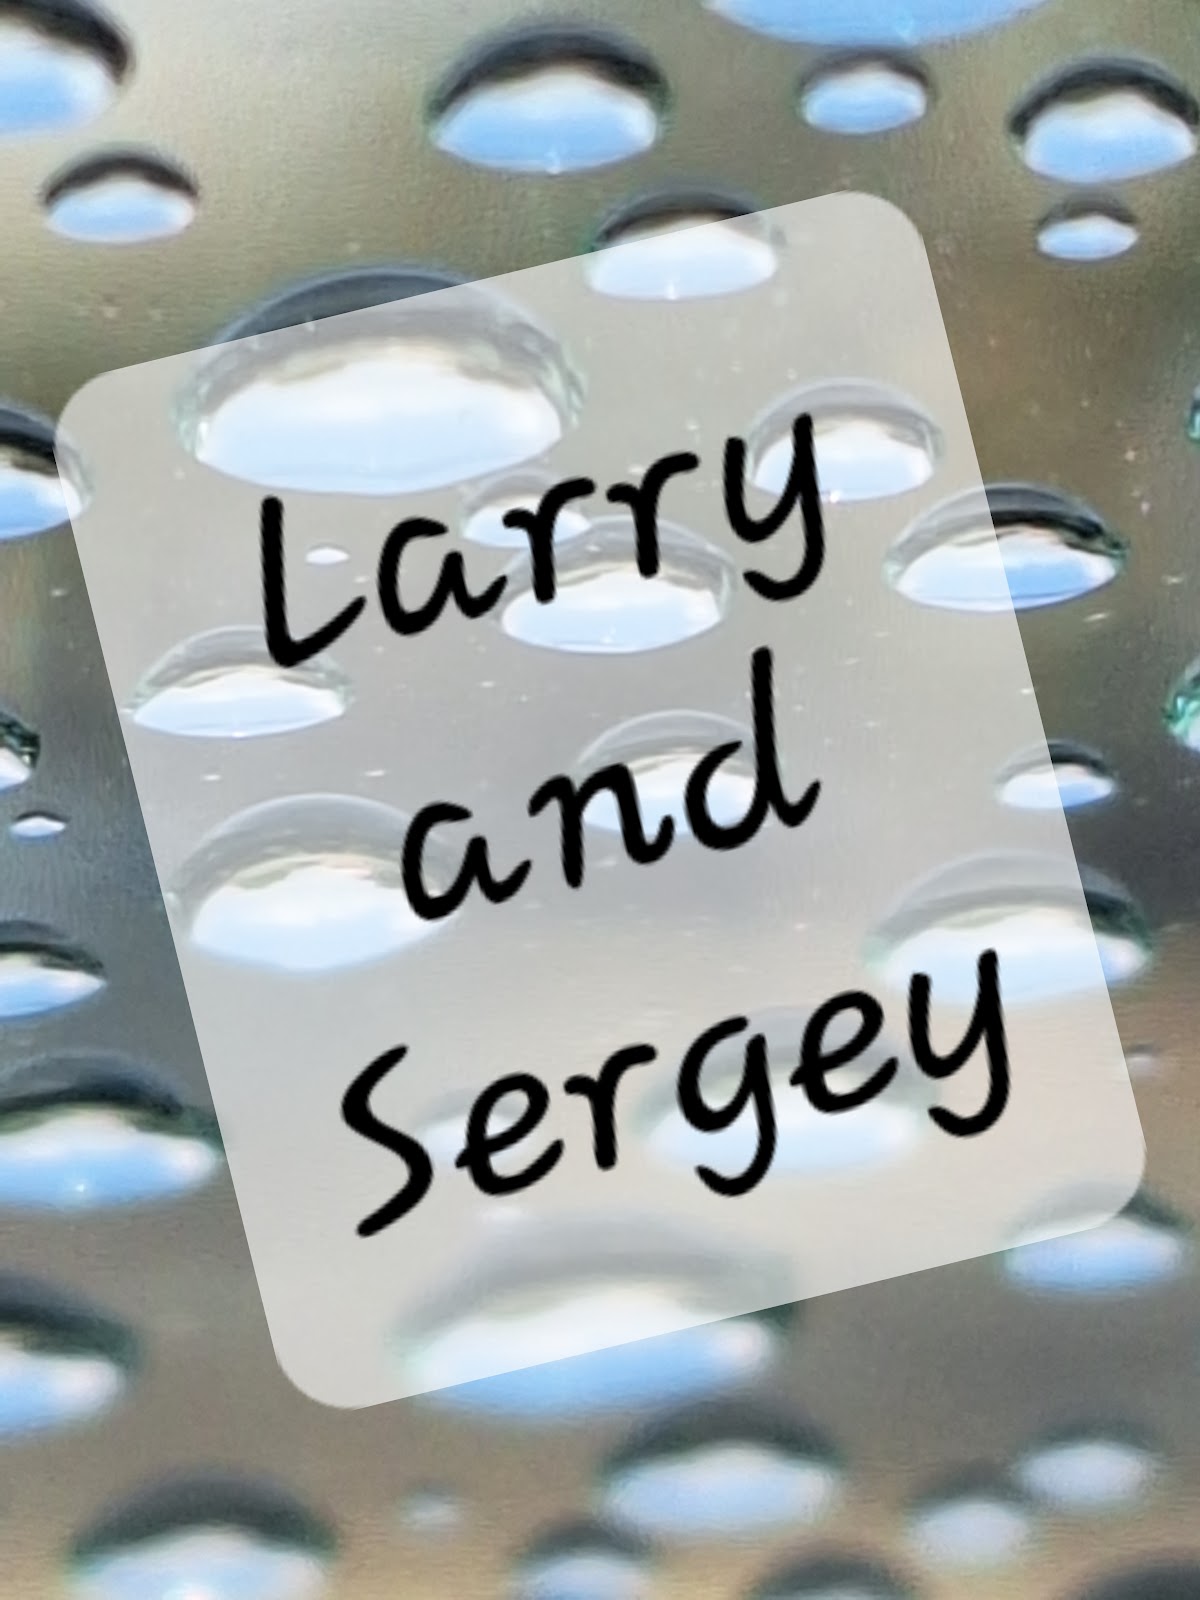 larry and sergey